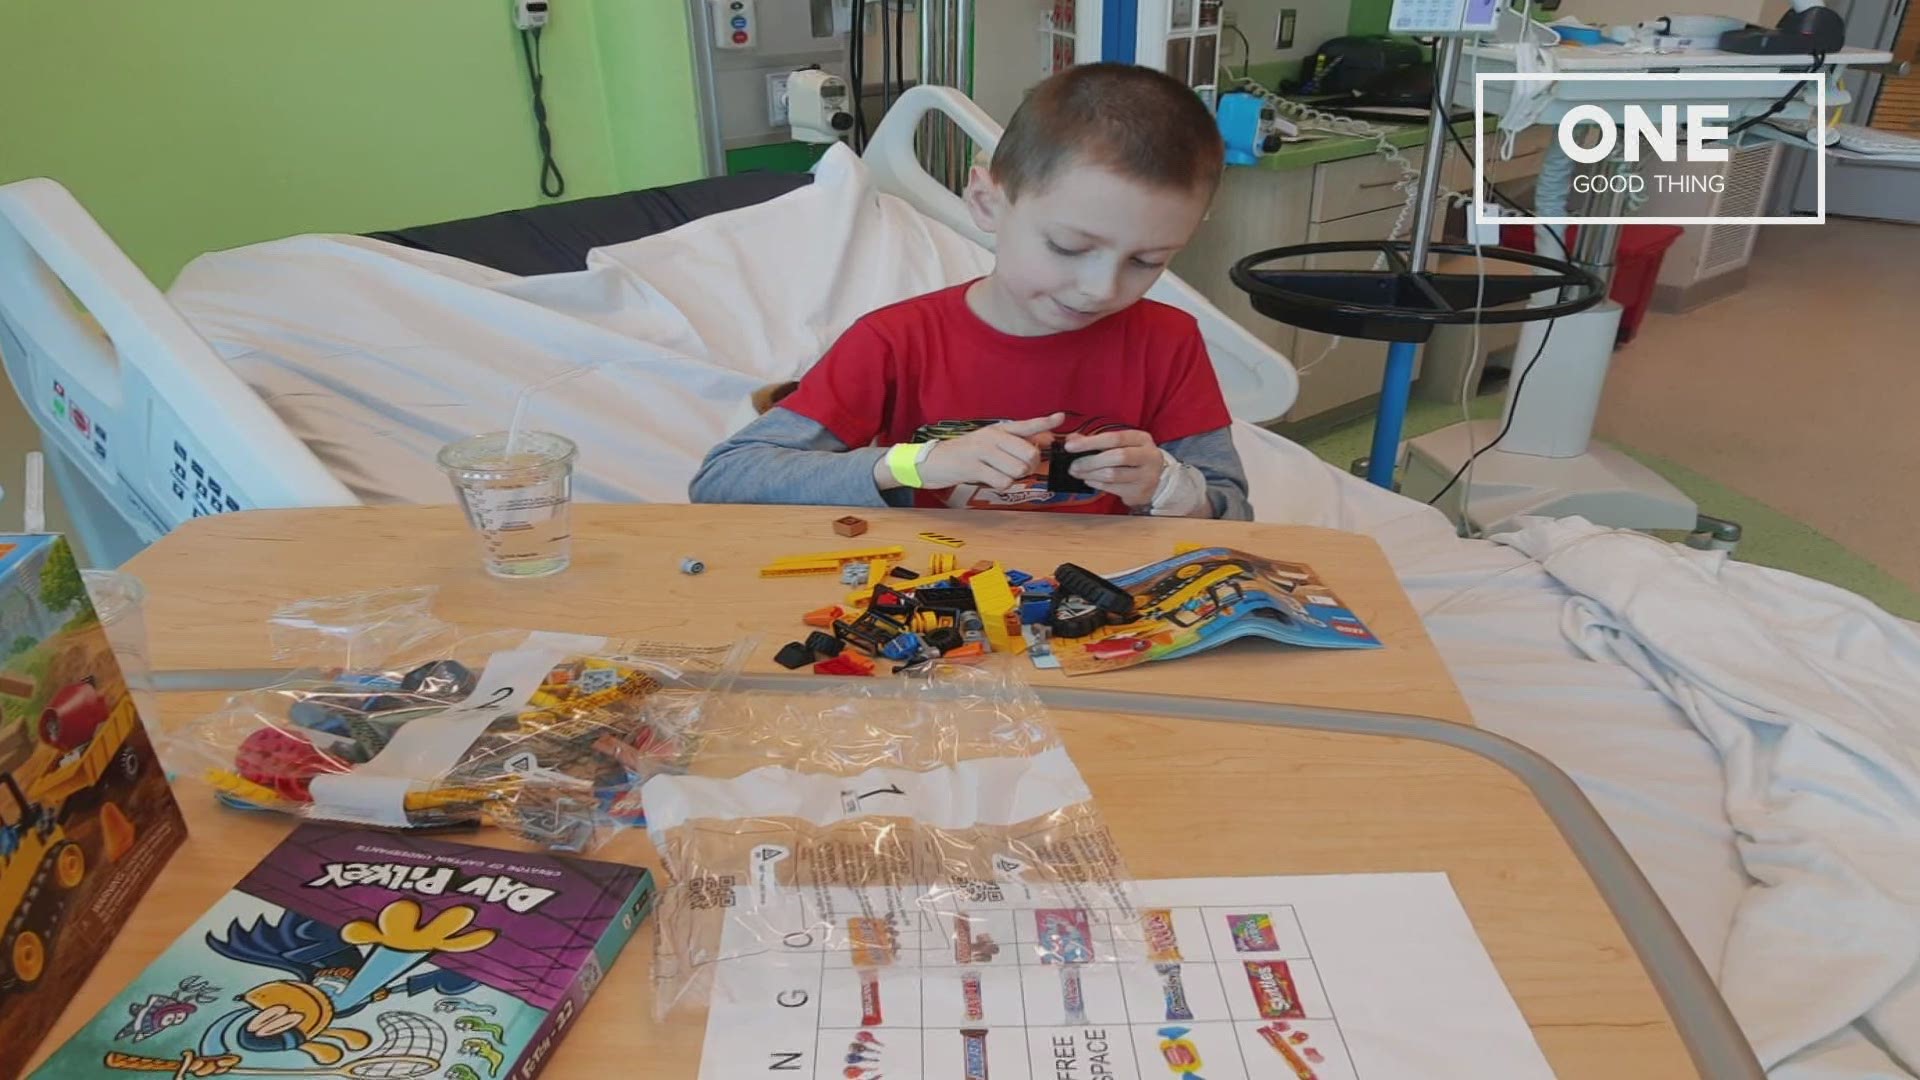 A local child who was helped by a local hospital is giving back. And you can help.